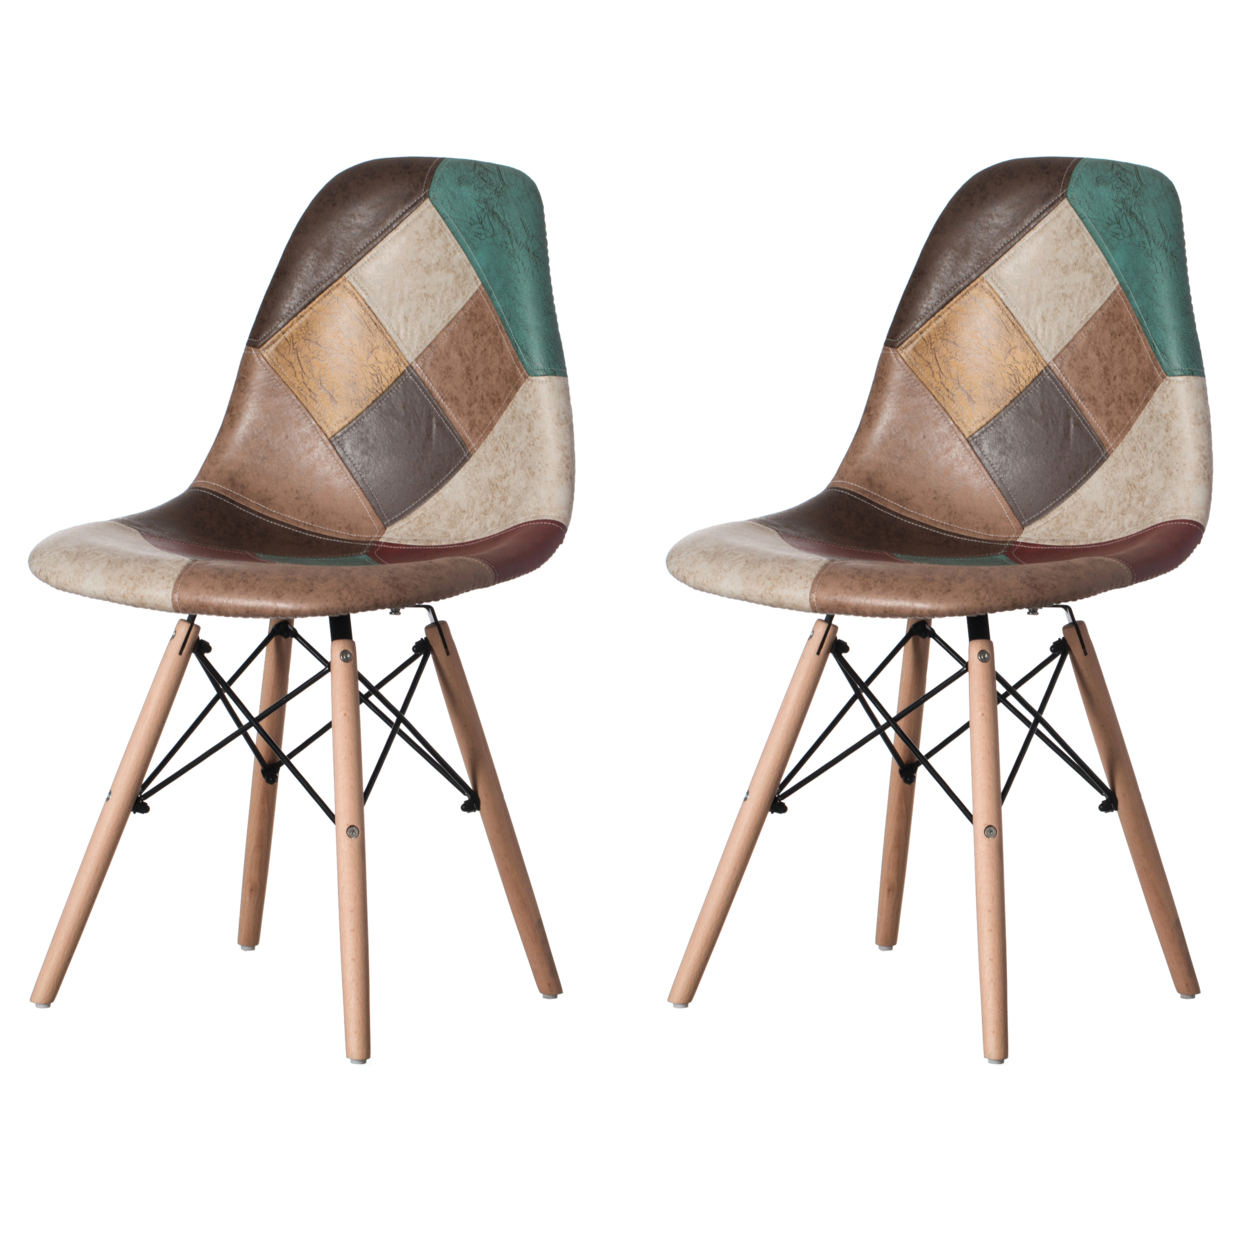 Modern Fabric Patchwork Chair With Leather And Suede Like Tones With Wooden Legs For Kitchen, Dining Room, Entryway, Living Room - Set Of 2